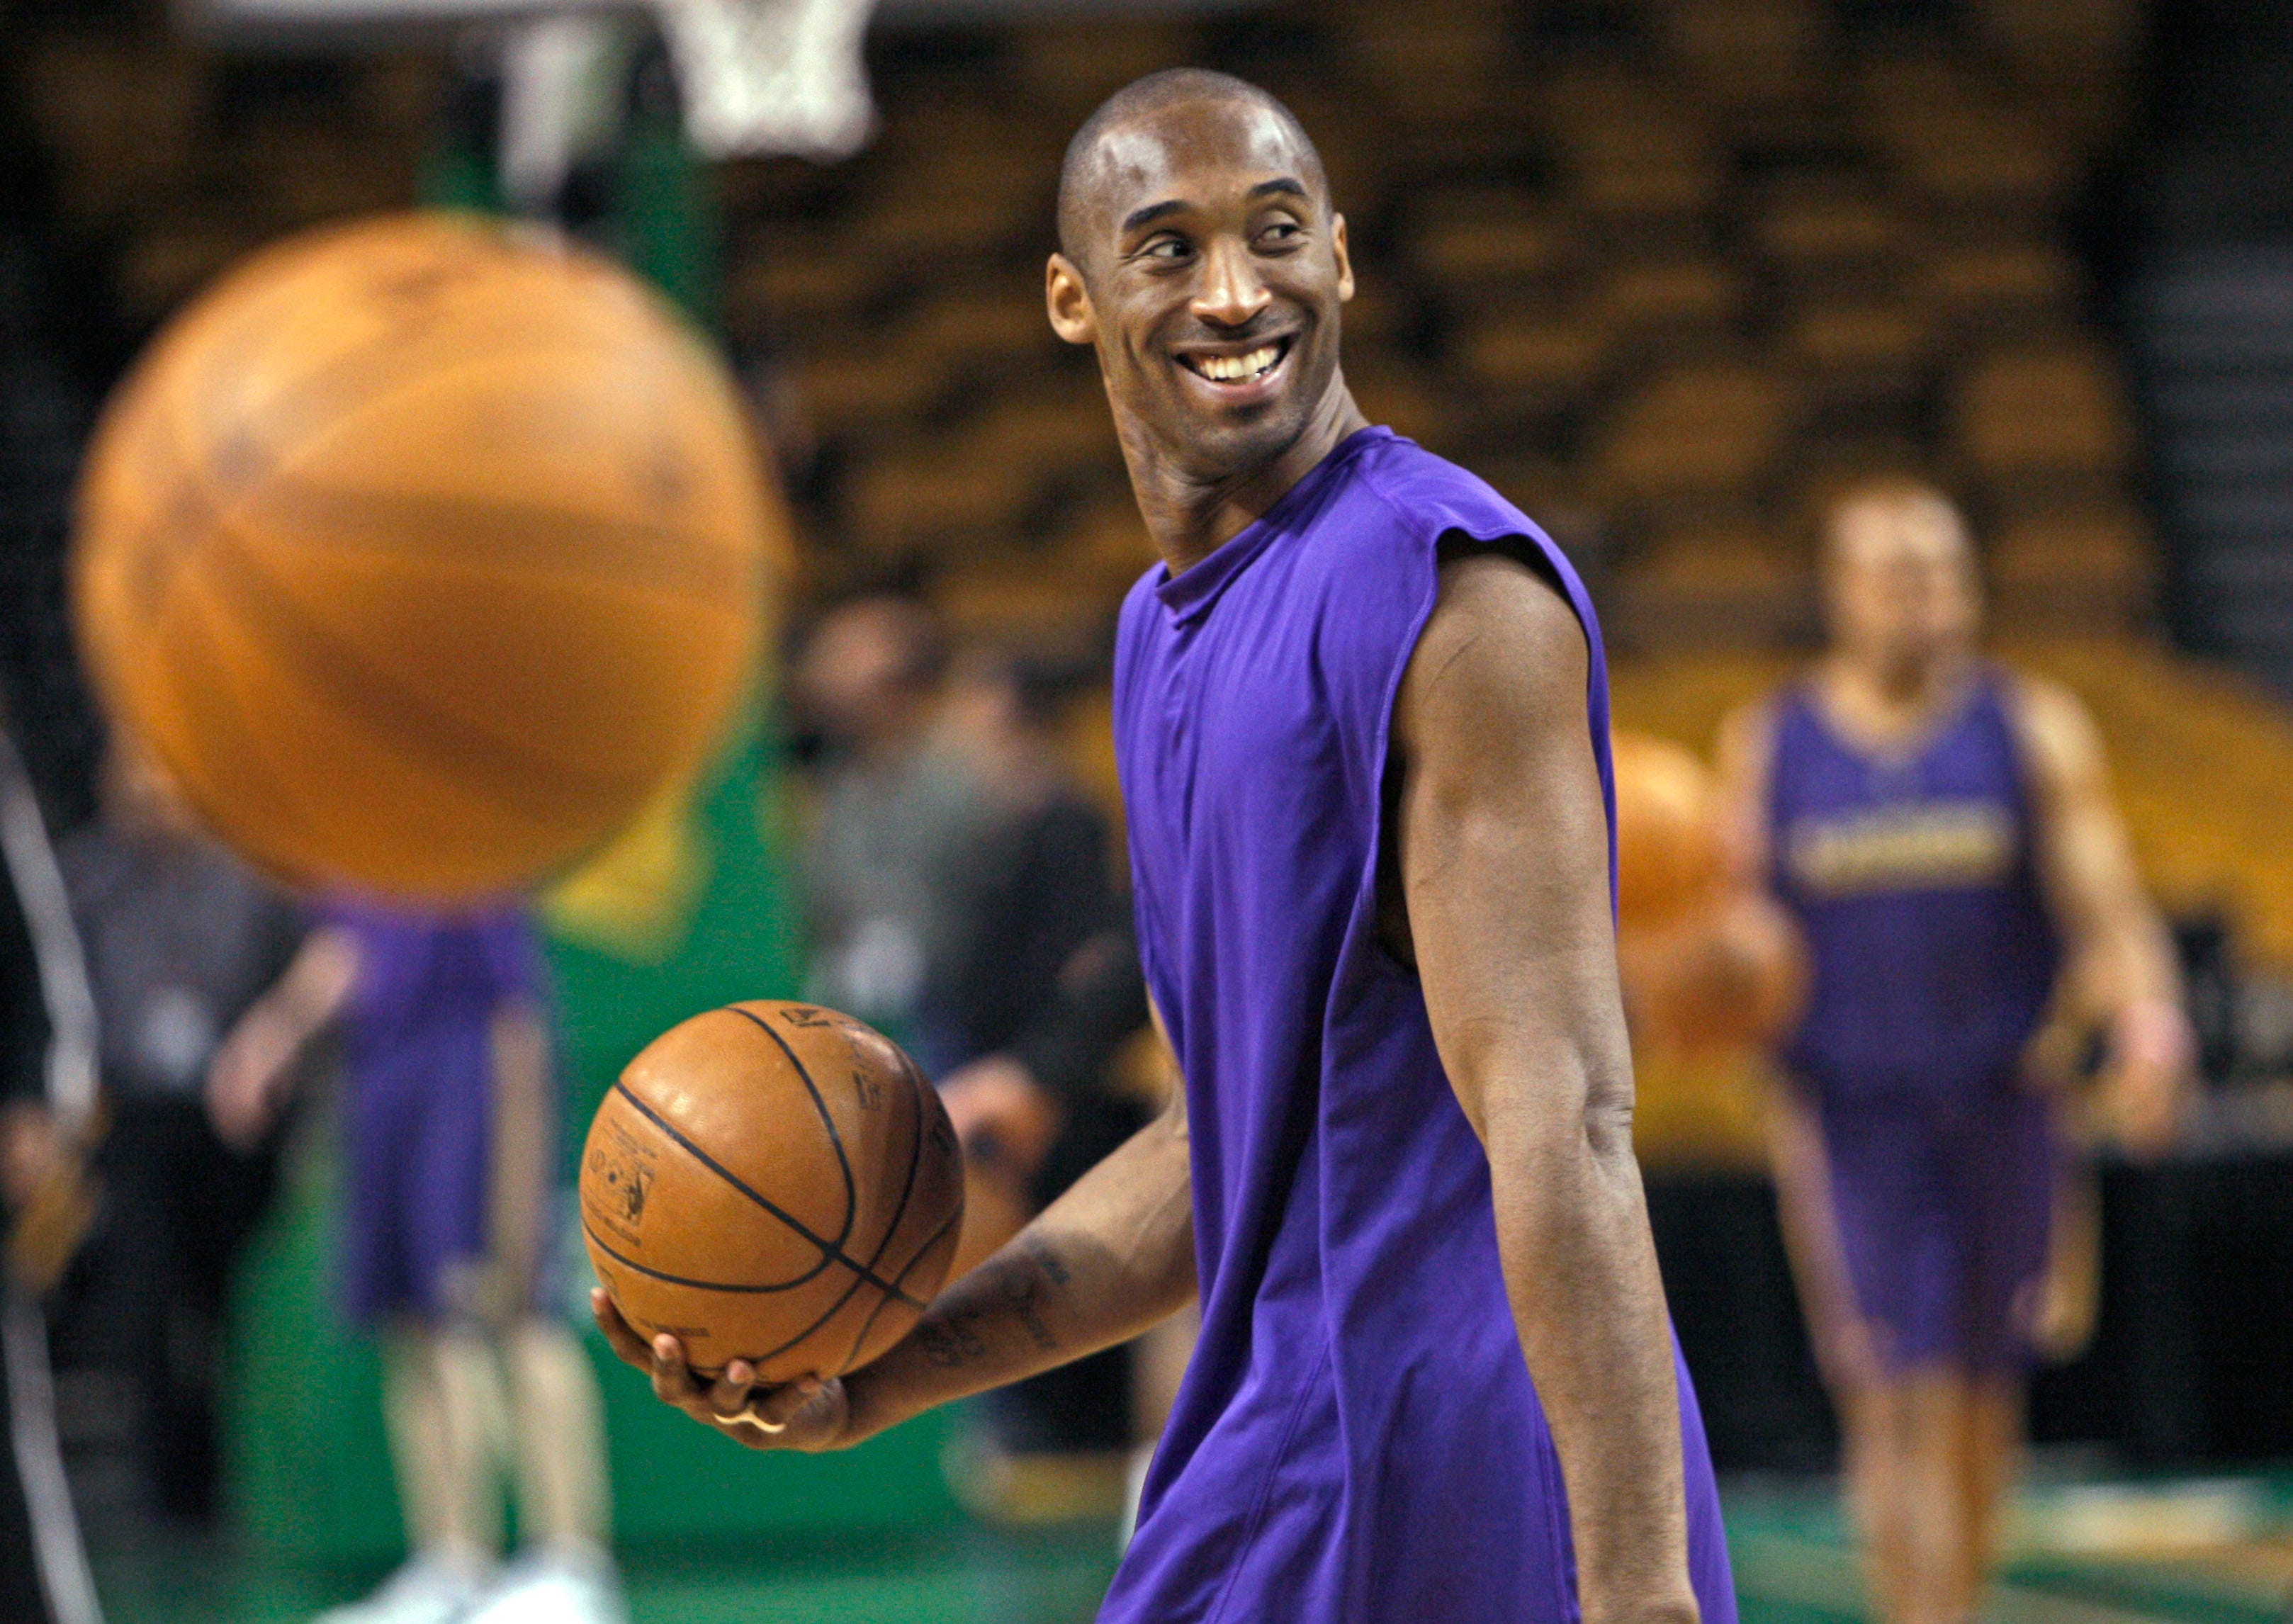 Kobe Bryant laughs with his teammates during practice in 2008.